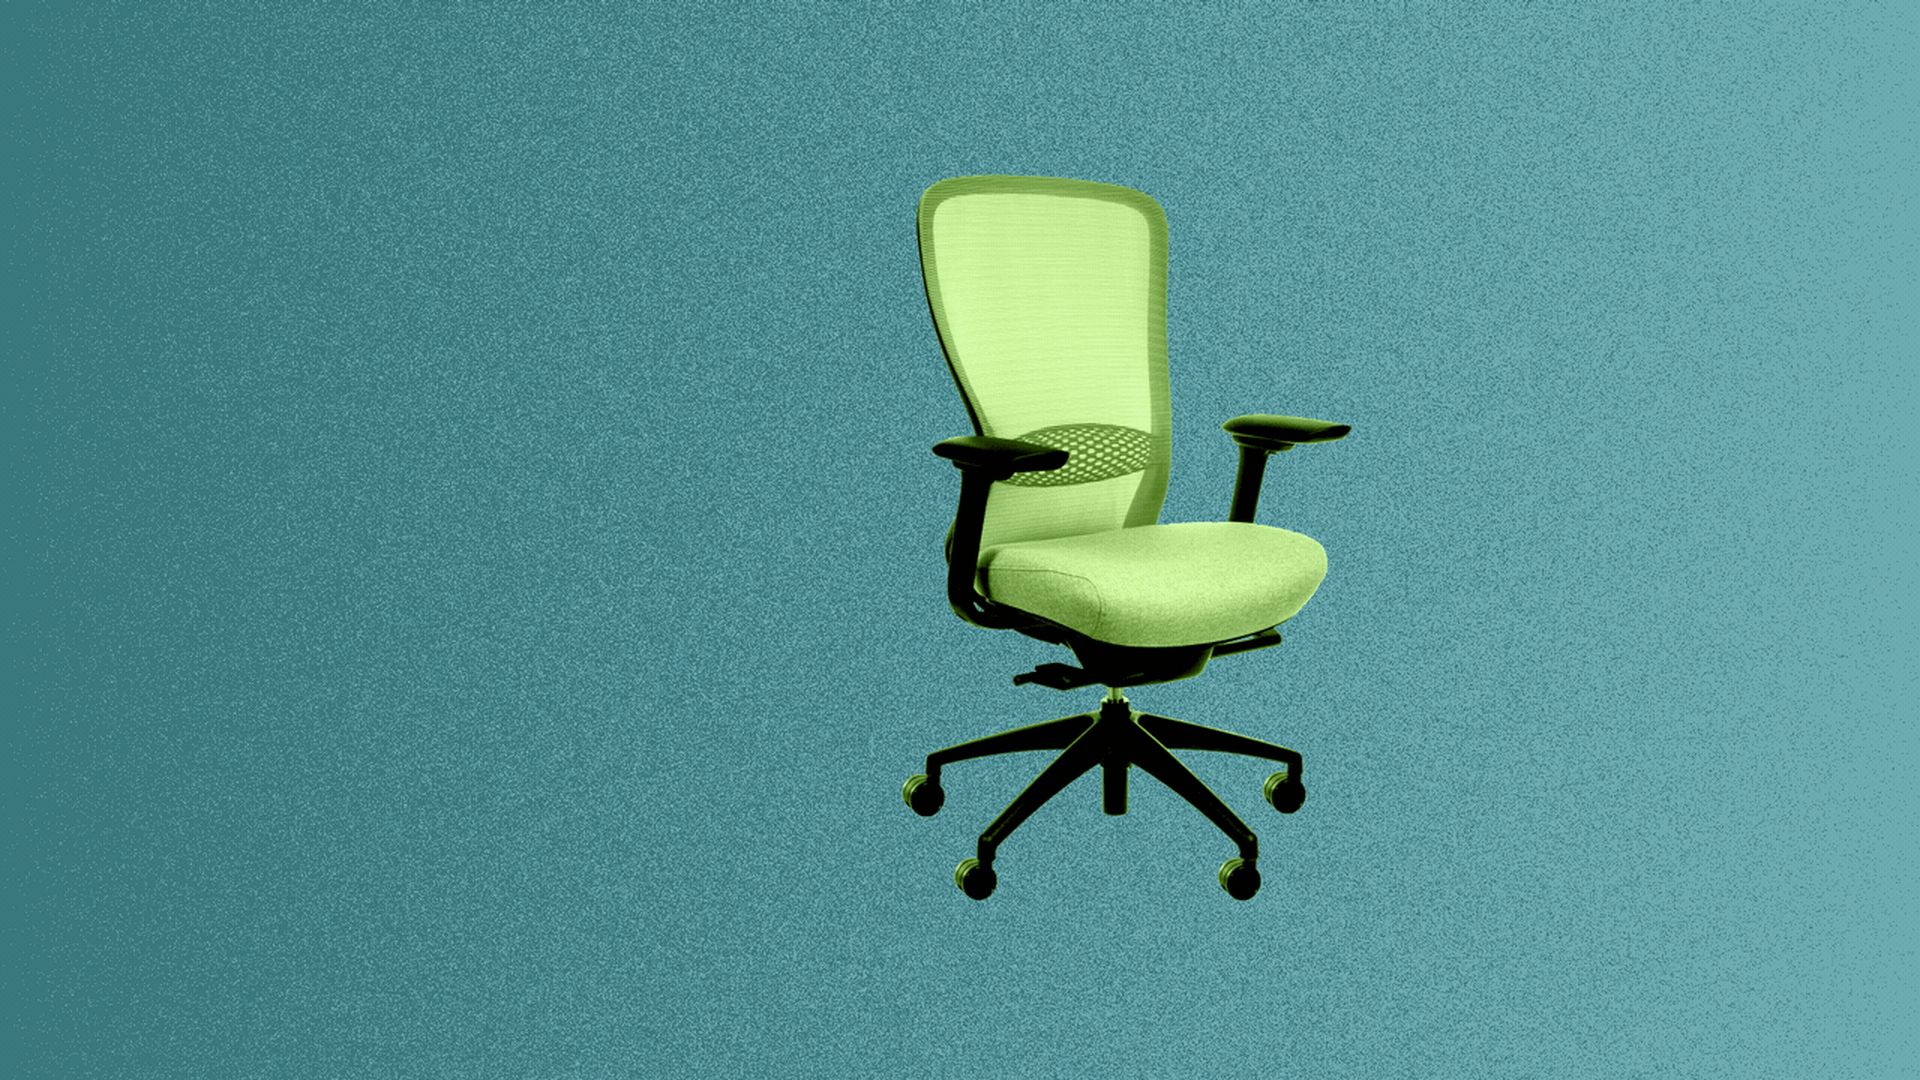 Illustration of an office chair moving from left to right, but slowing down and reversing before it gets all the way across the screen.